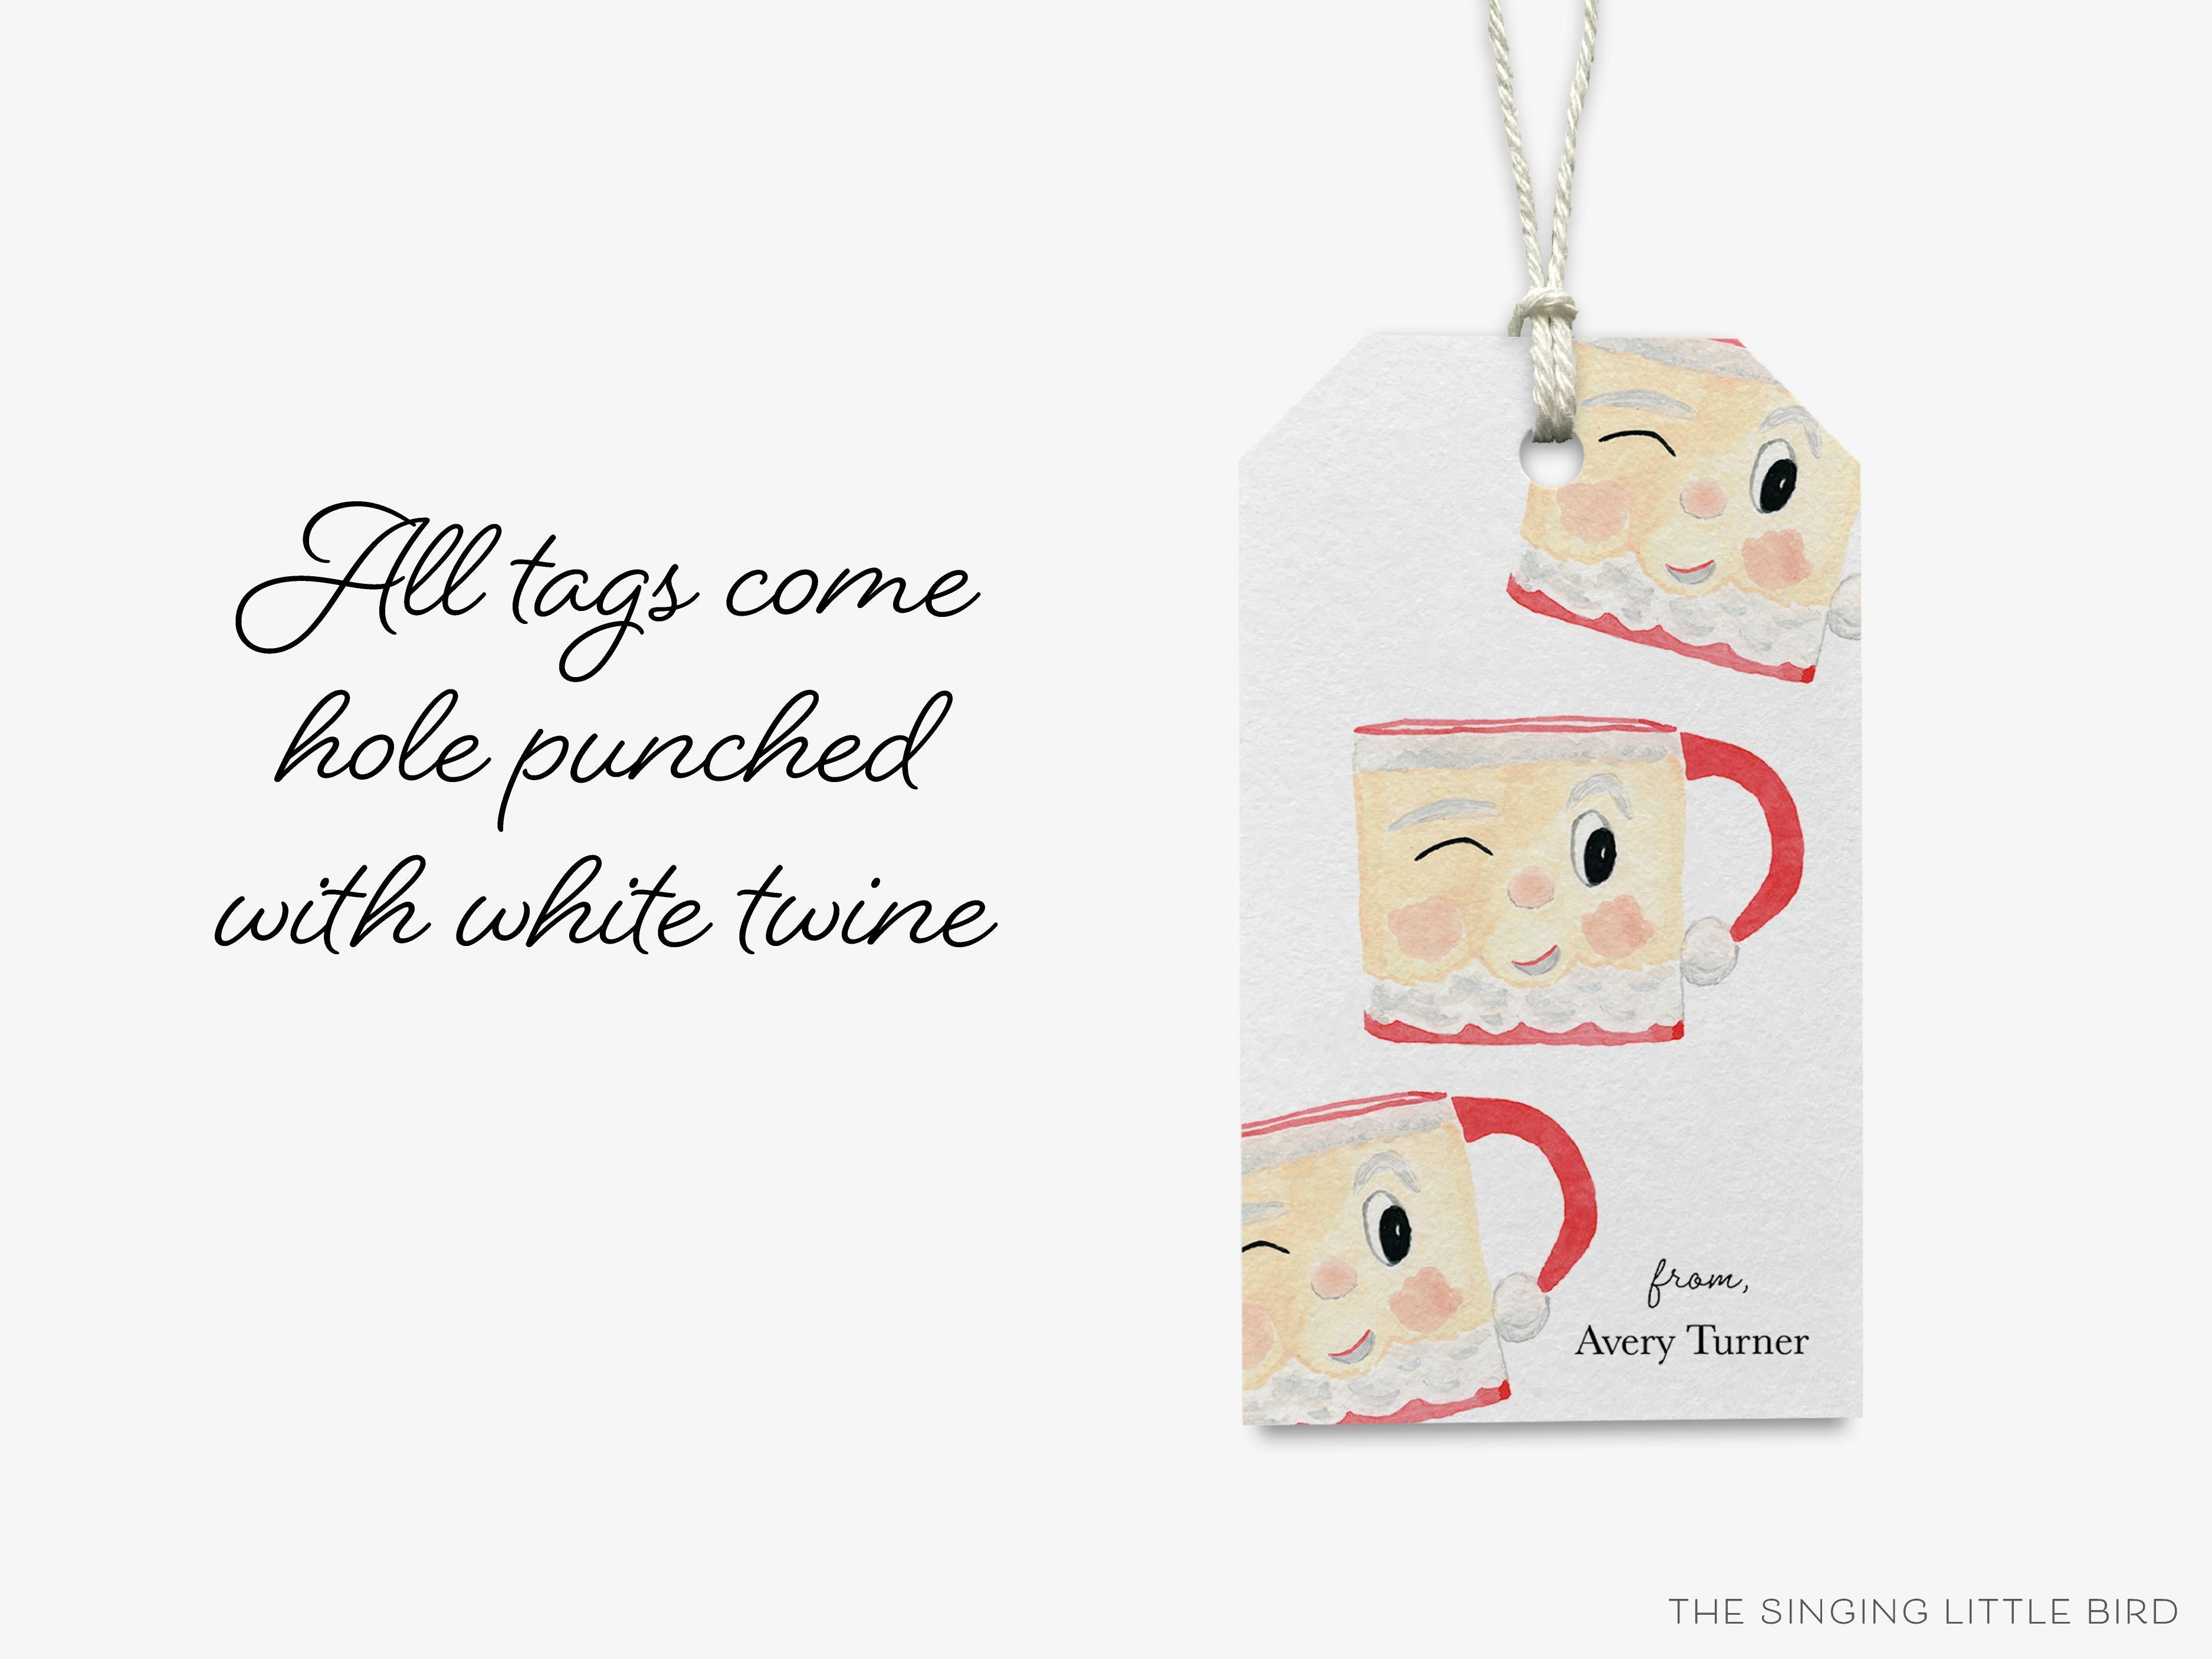 Personalized Santa Claus Mug Holiday Gift Tags-These gift tags come in sets, hole-punched with white twine and feature our hand-painted watercolor Santa Claus mug, printed in the USA on 120lb textured stock. They make great tags for gifting or gifts for the holiday lover in your life.-The Singing Little Bird